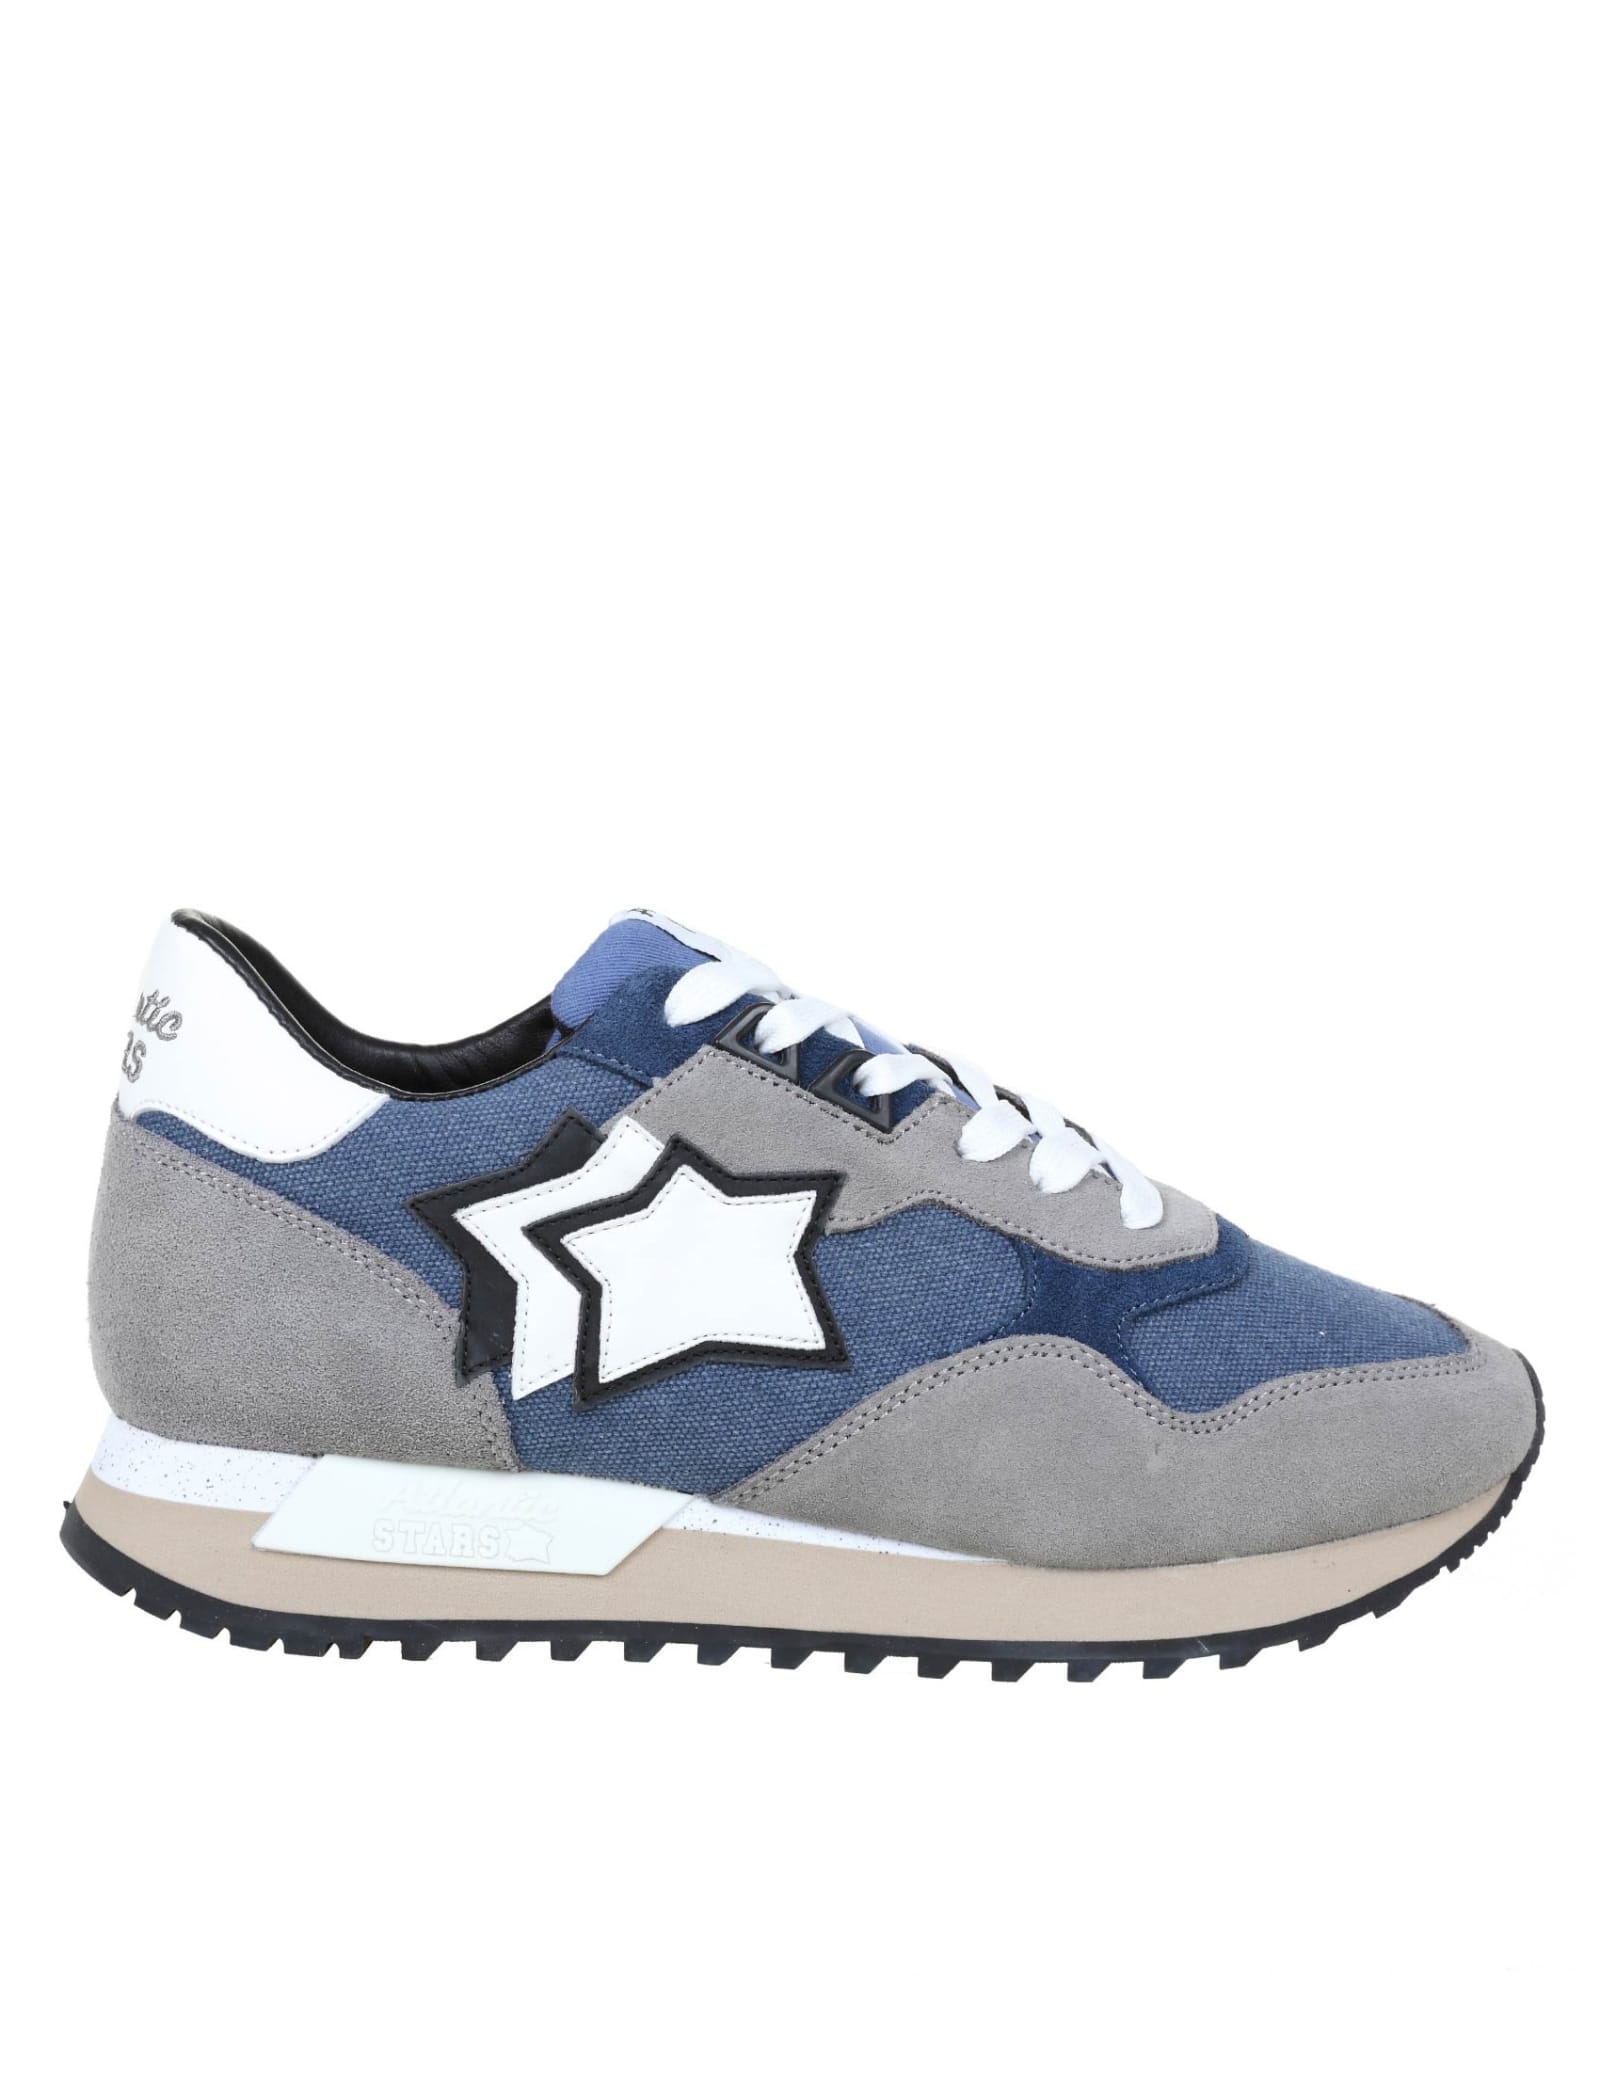 Atlantic Stars Draco Sneakers In Fabric And Suede